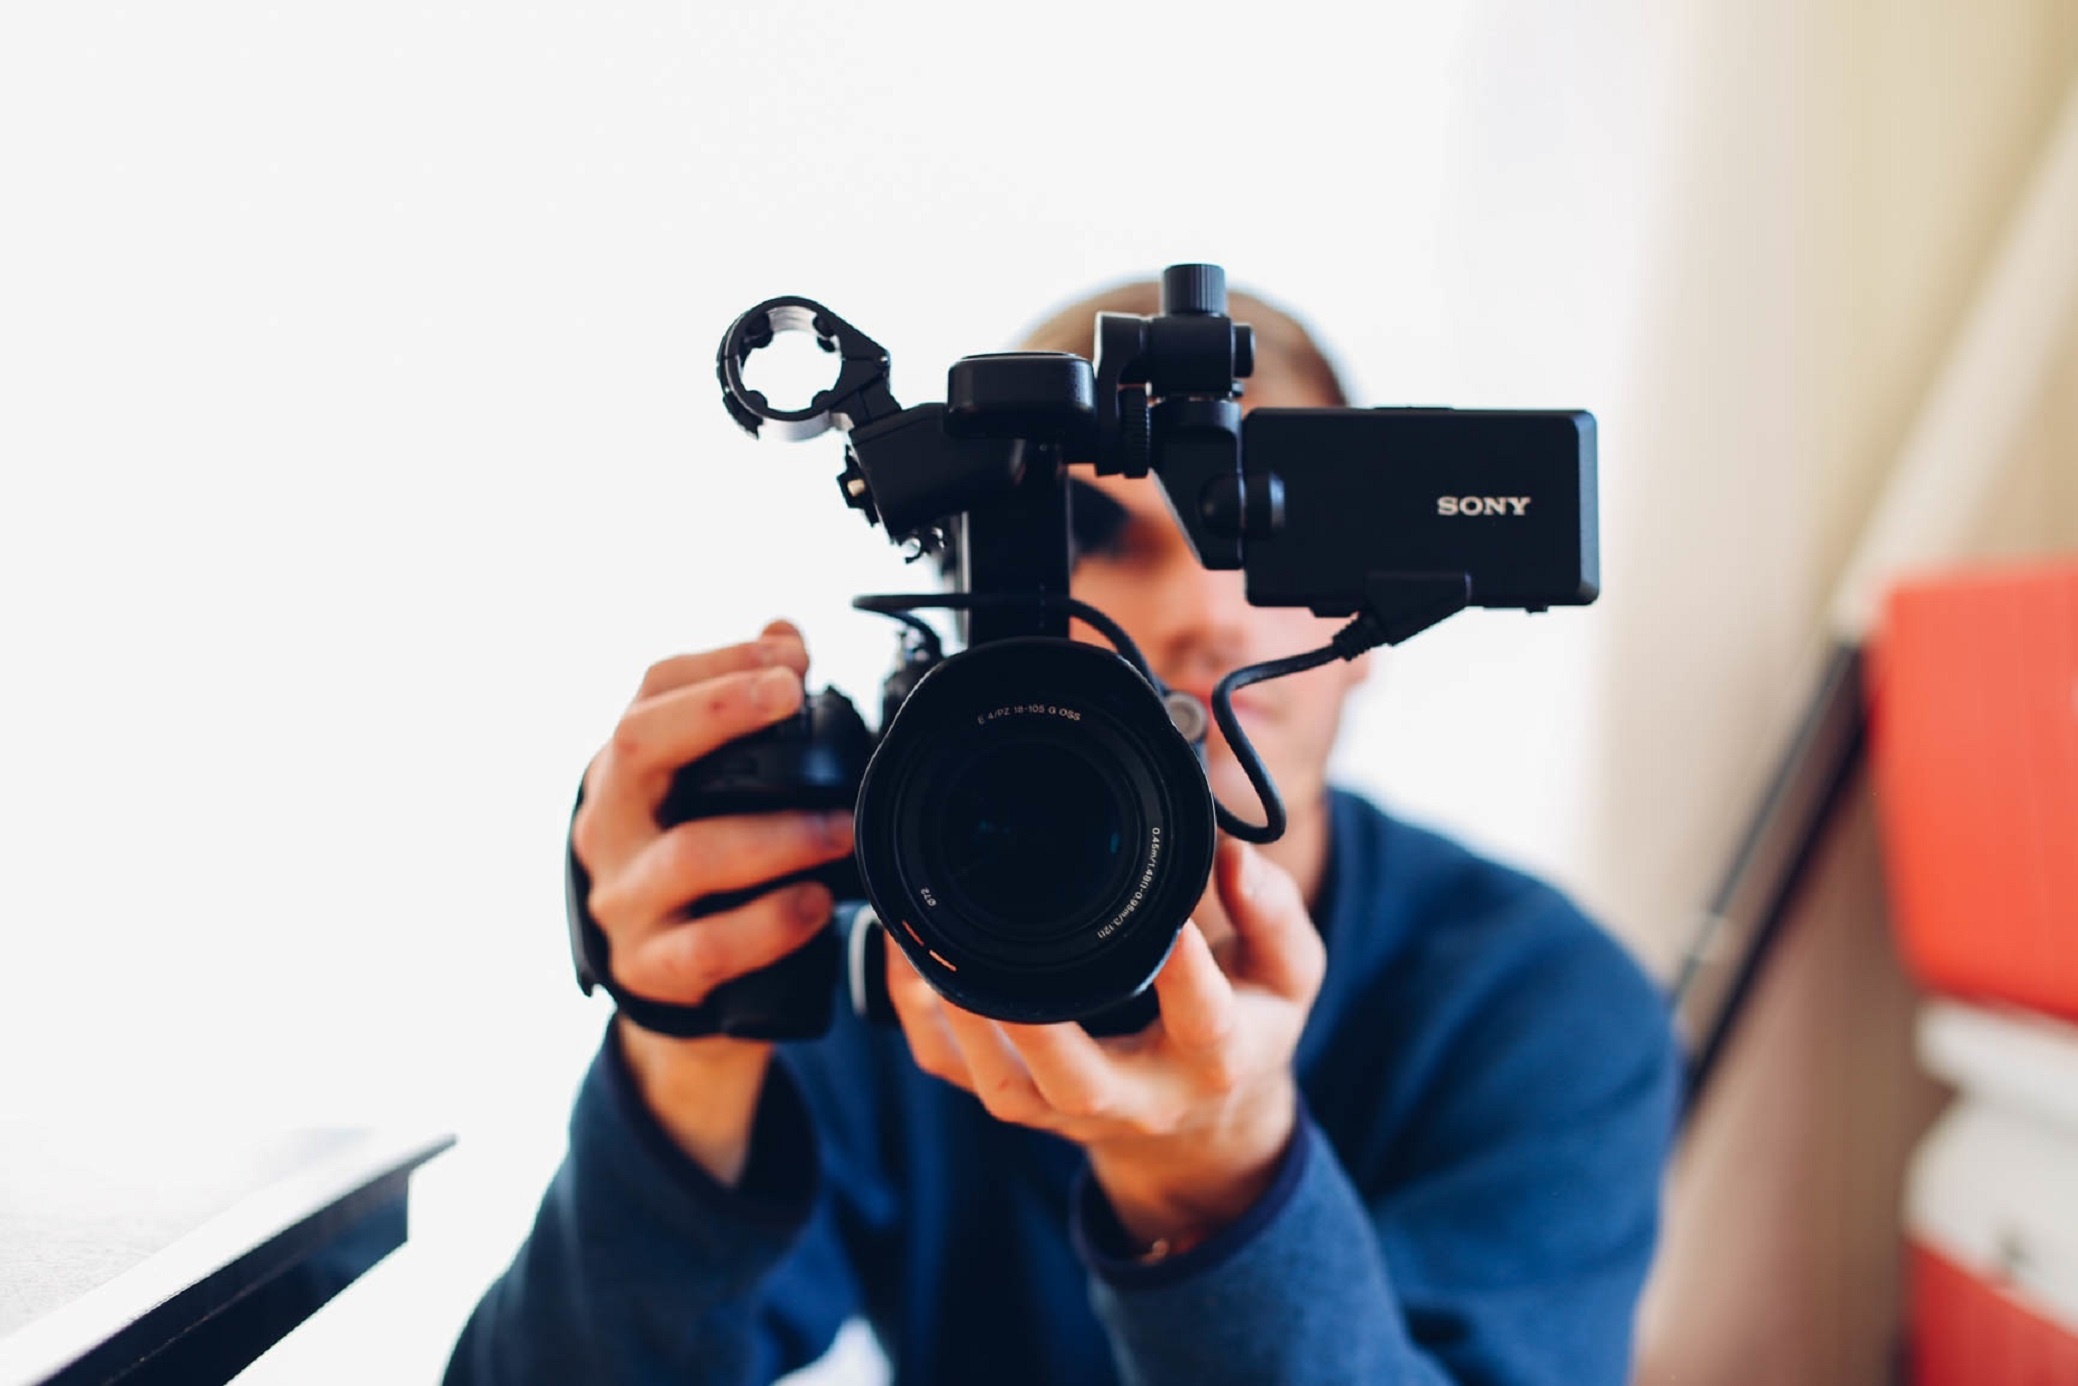 Using Video Marketing to Land More Local Insurance Clients